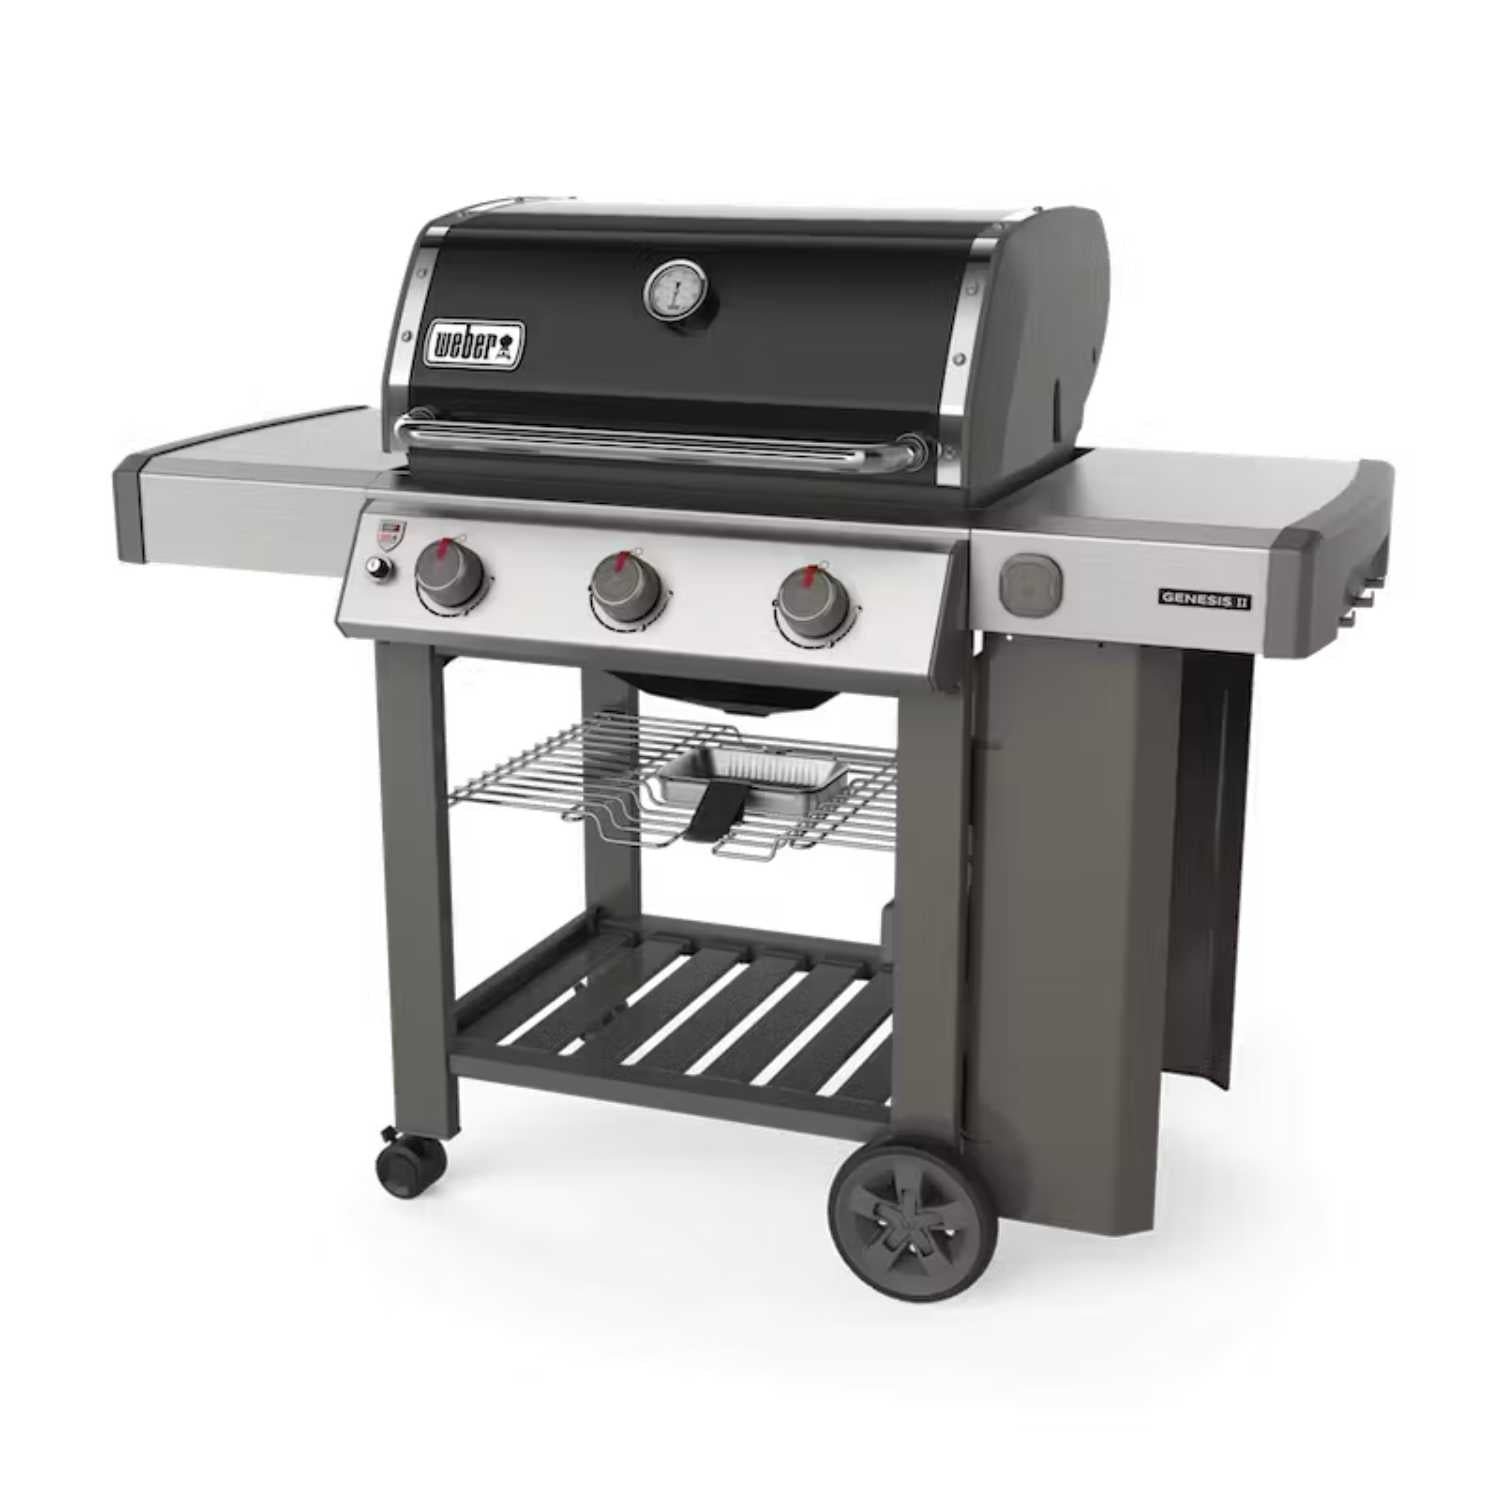 Weber Genesis II E-310 Grill perfect for outdoor barbecues available at MeatKing.hk4